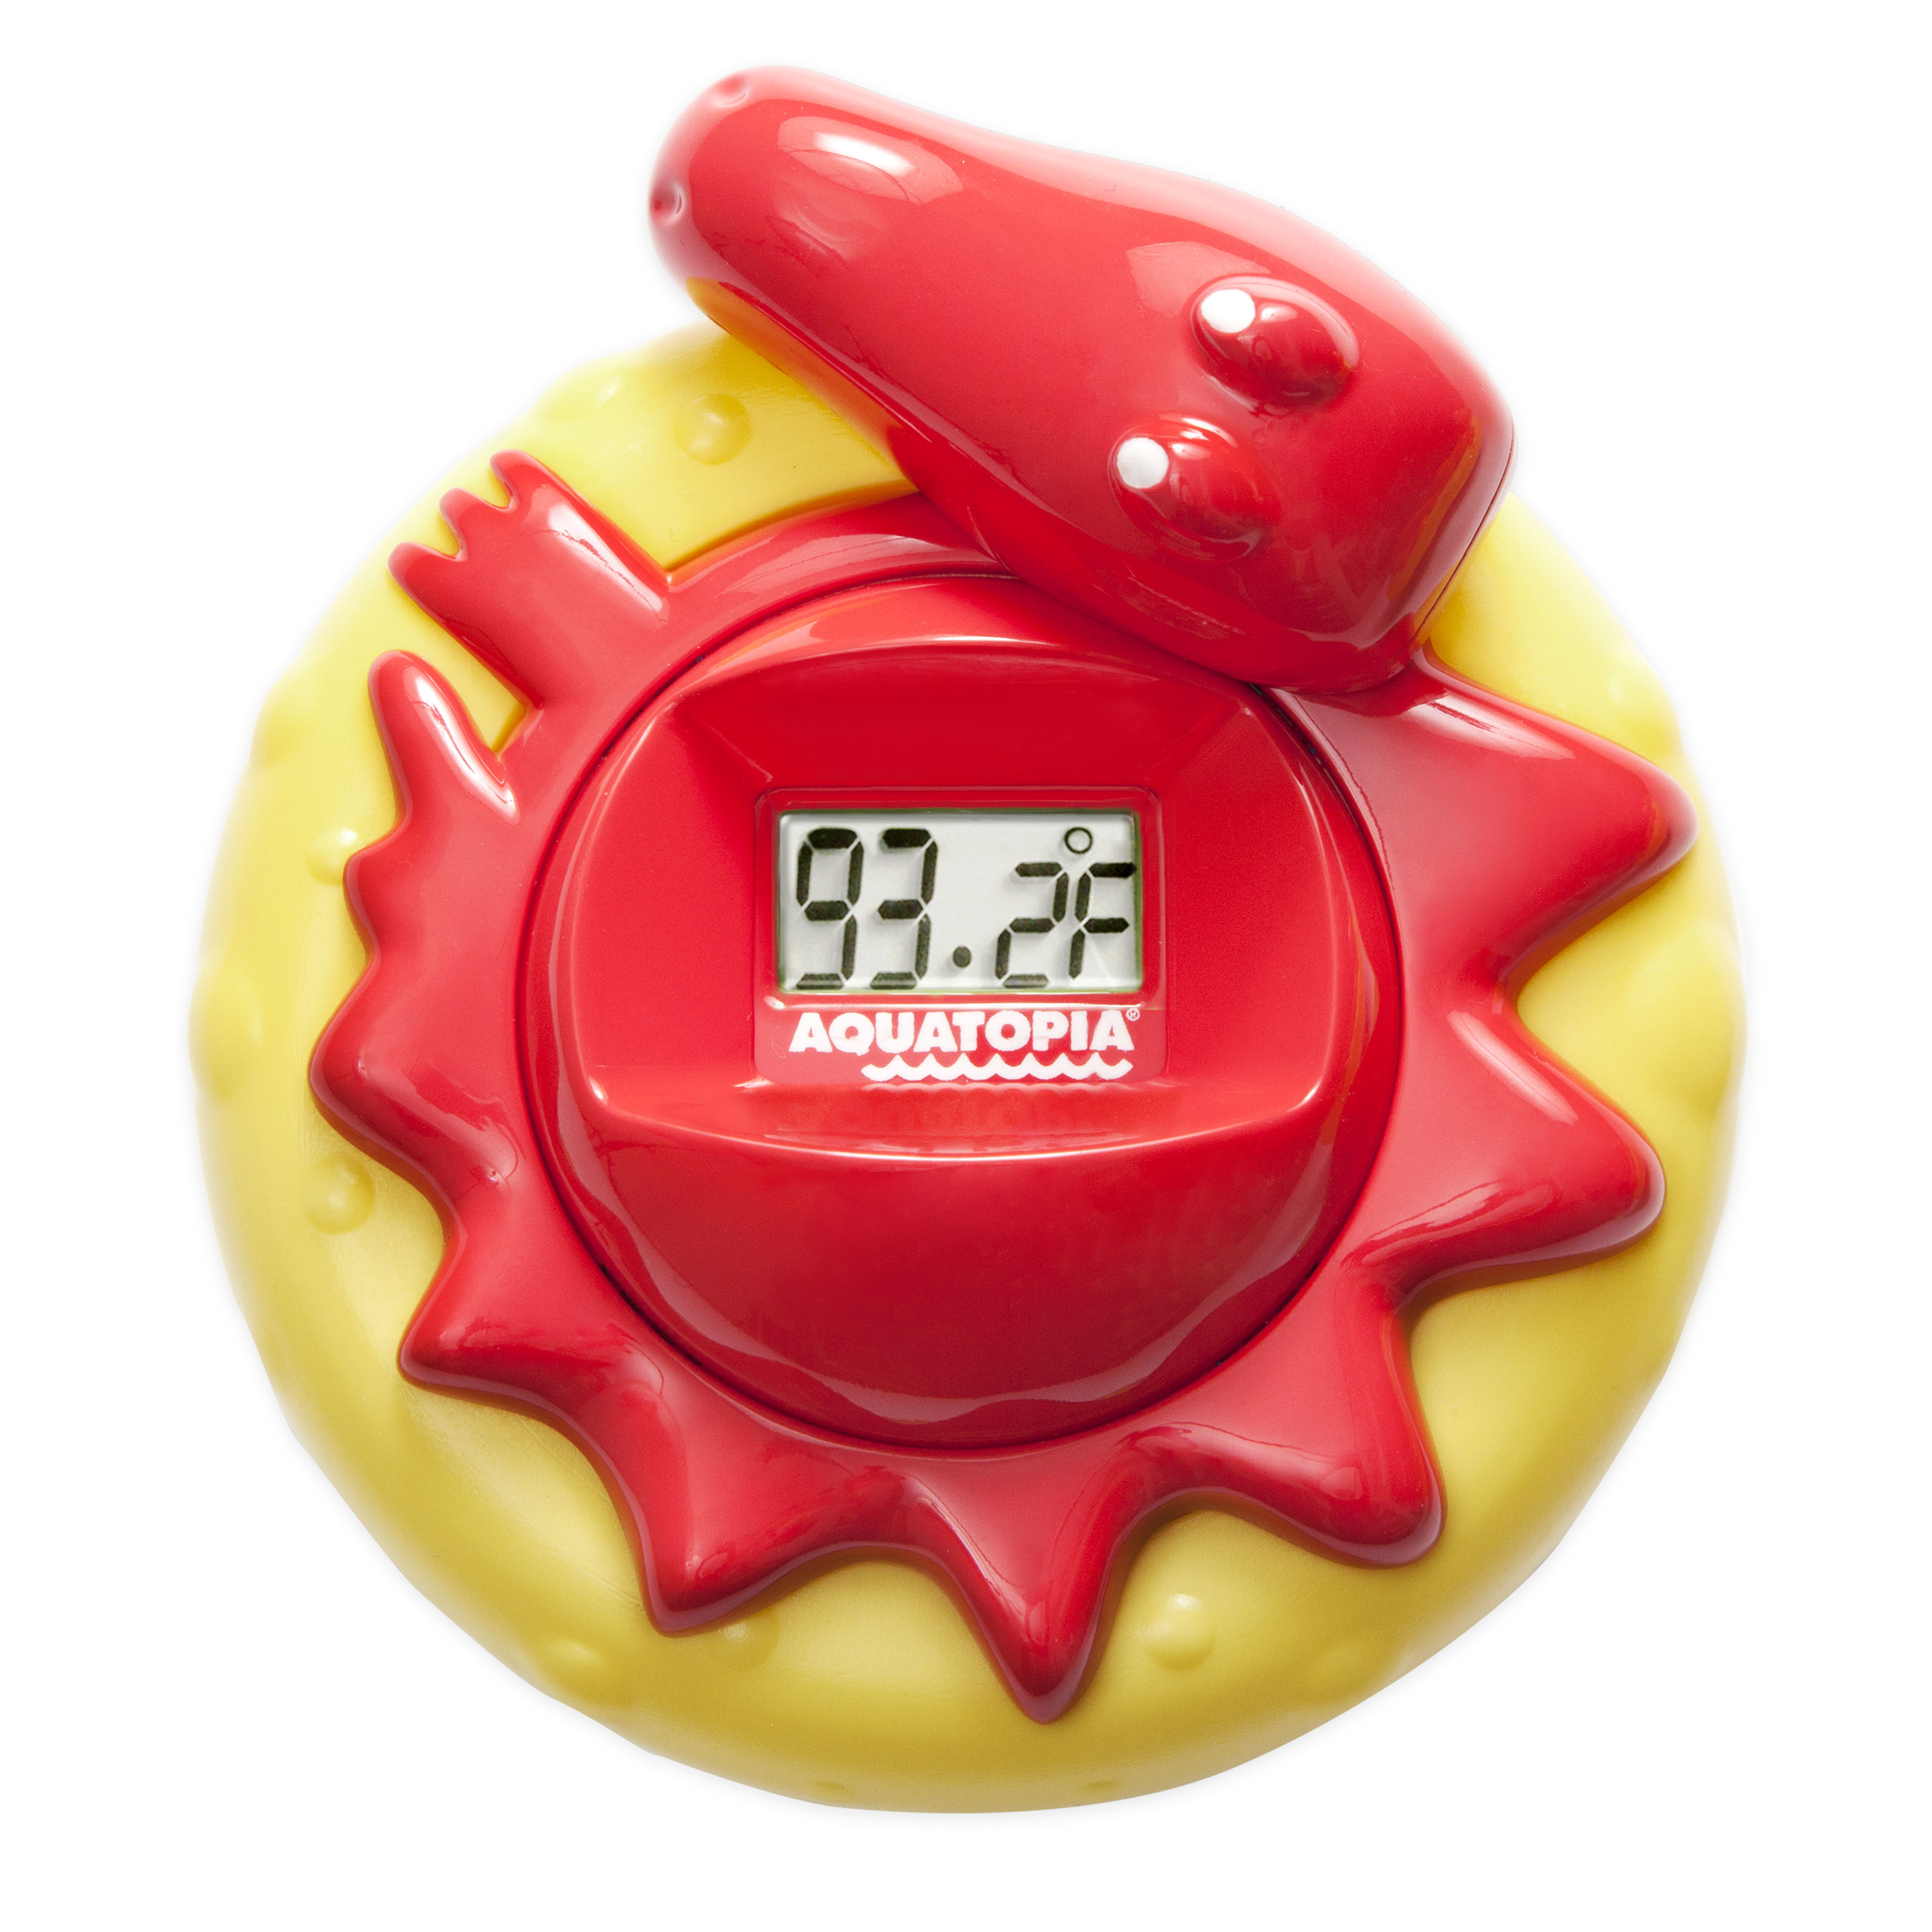 Aquatopia Safety Bath Thermometer with Digital Audible Alarm, Red - image 1 of 6